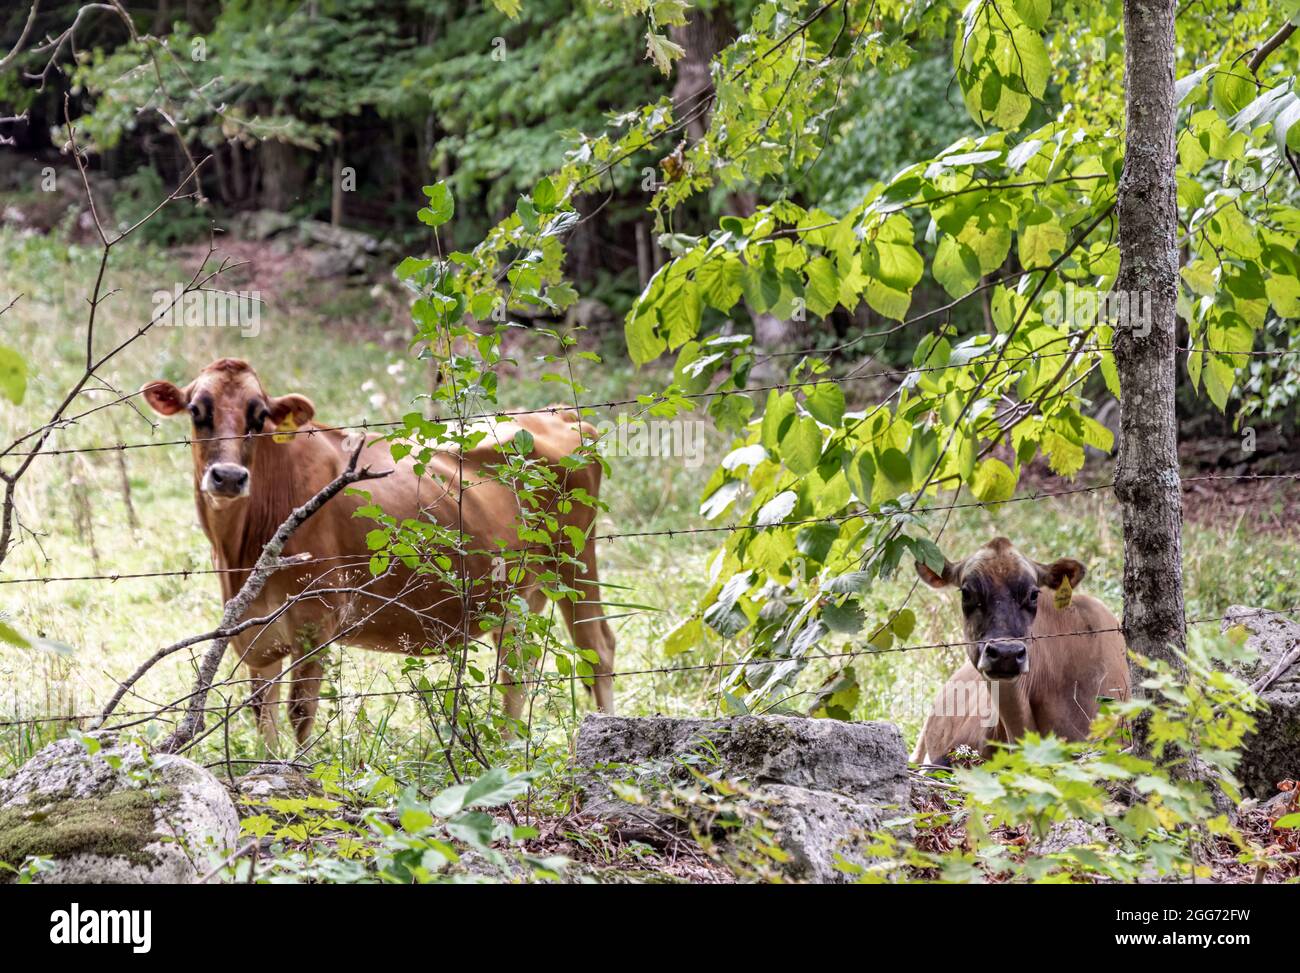 Cows in a New Hampshire field Stock Photo